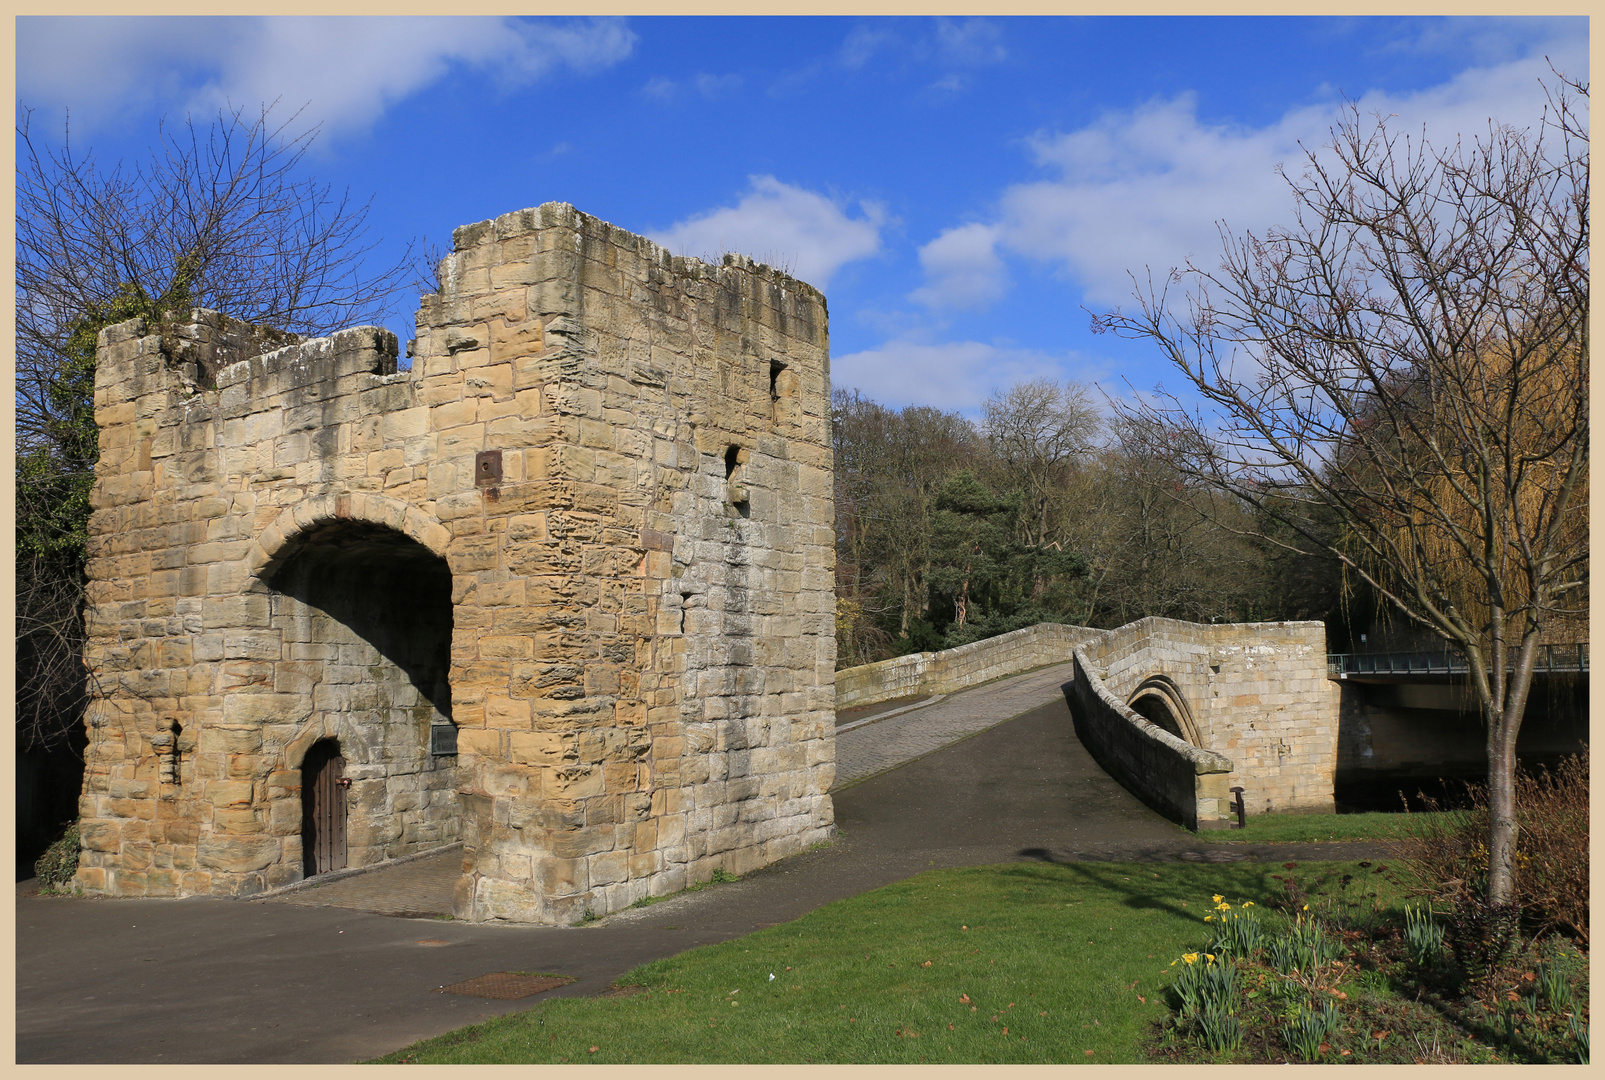 the medieval bridge and gate at warkworth